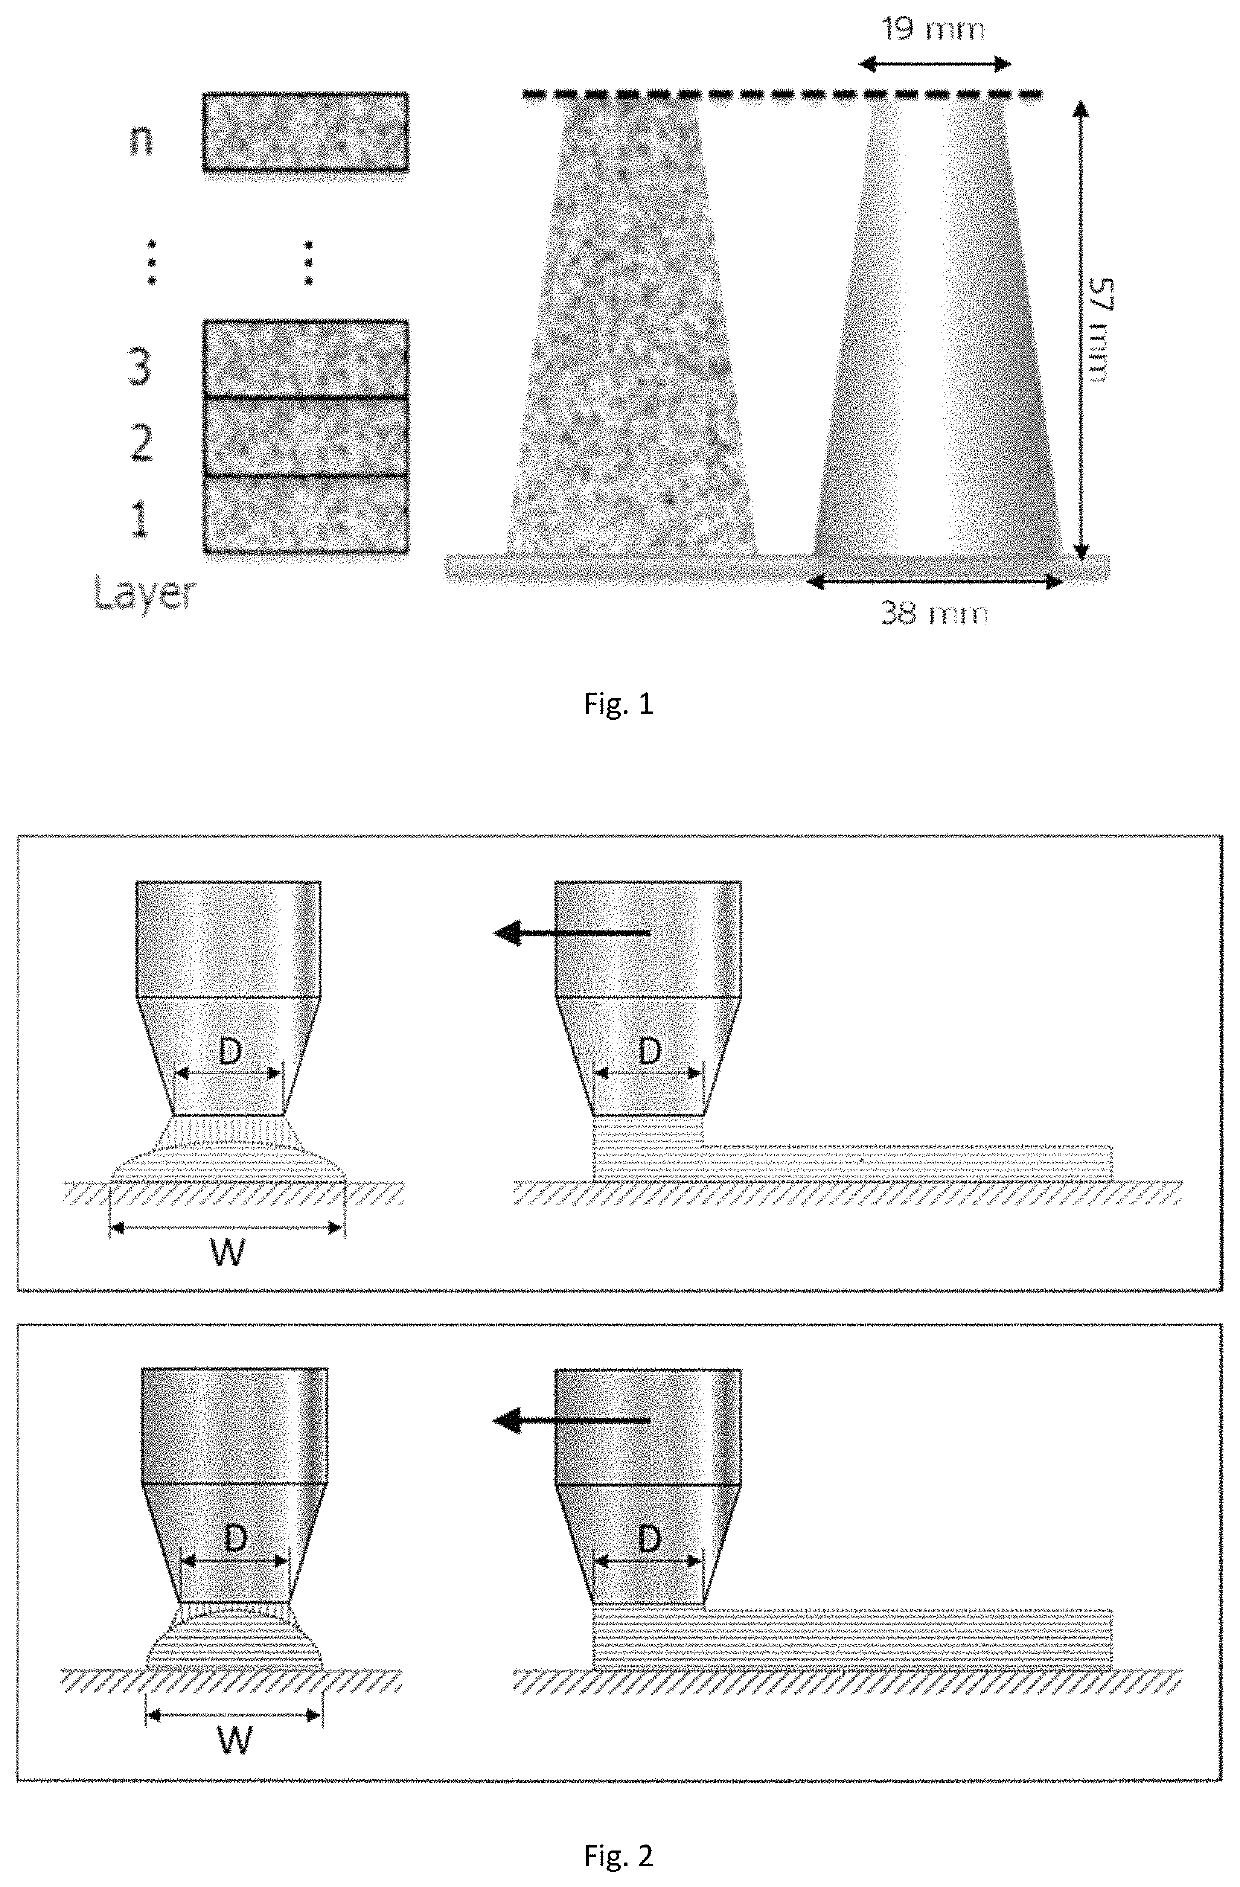 Binding material suitable for three-dimensional printing formation